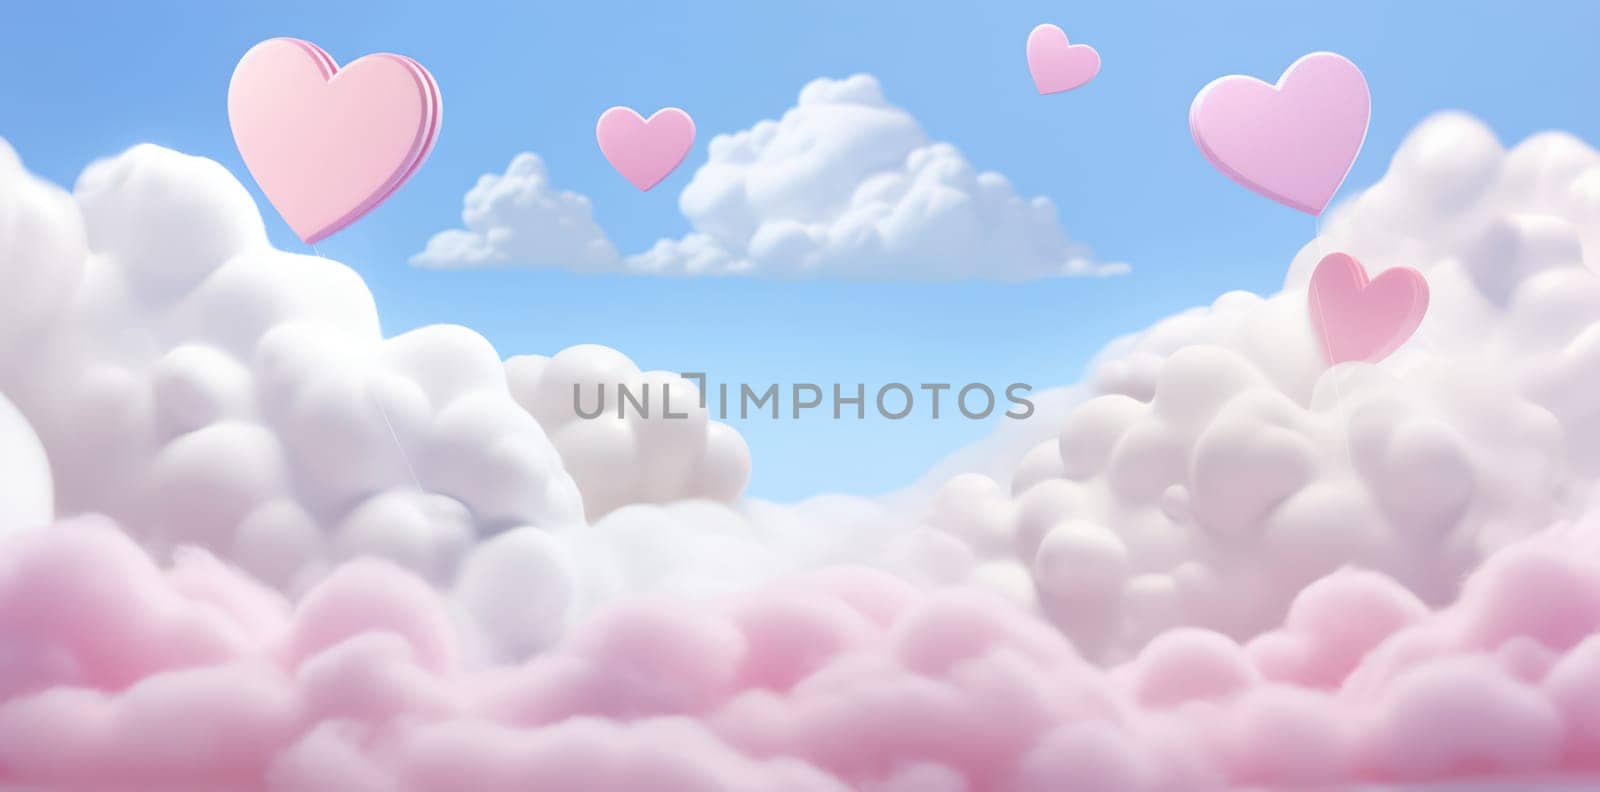 Pink Beauty: Abstract Sky in the Clouds